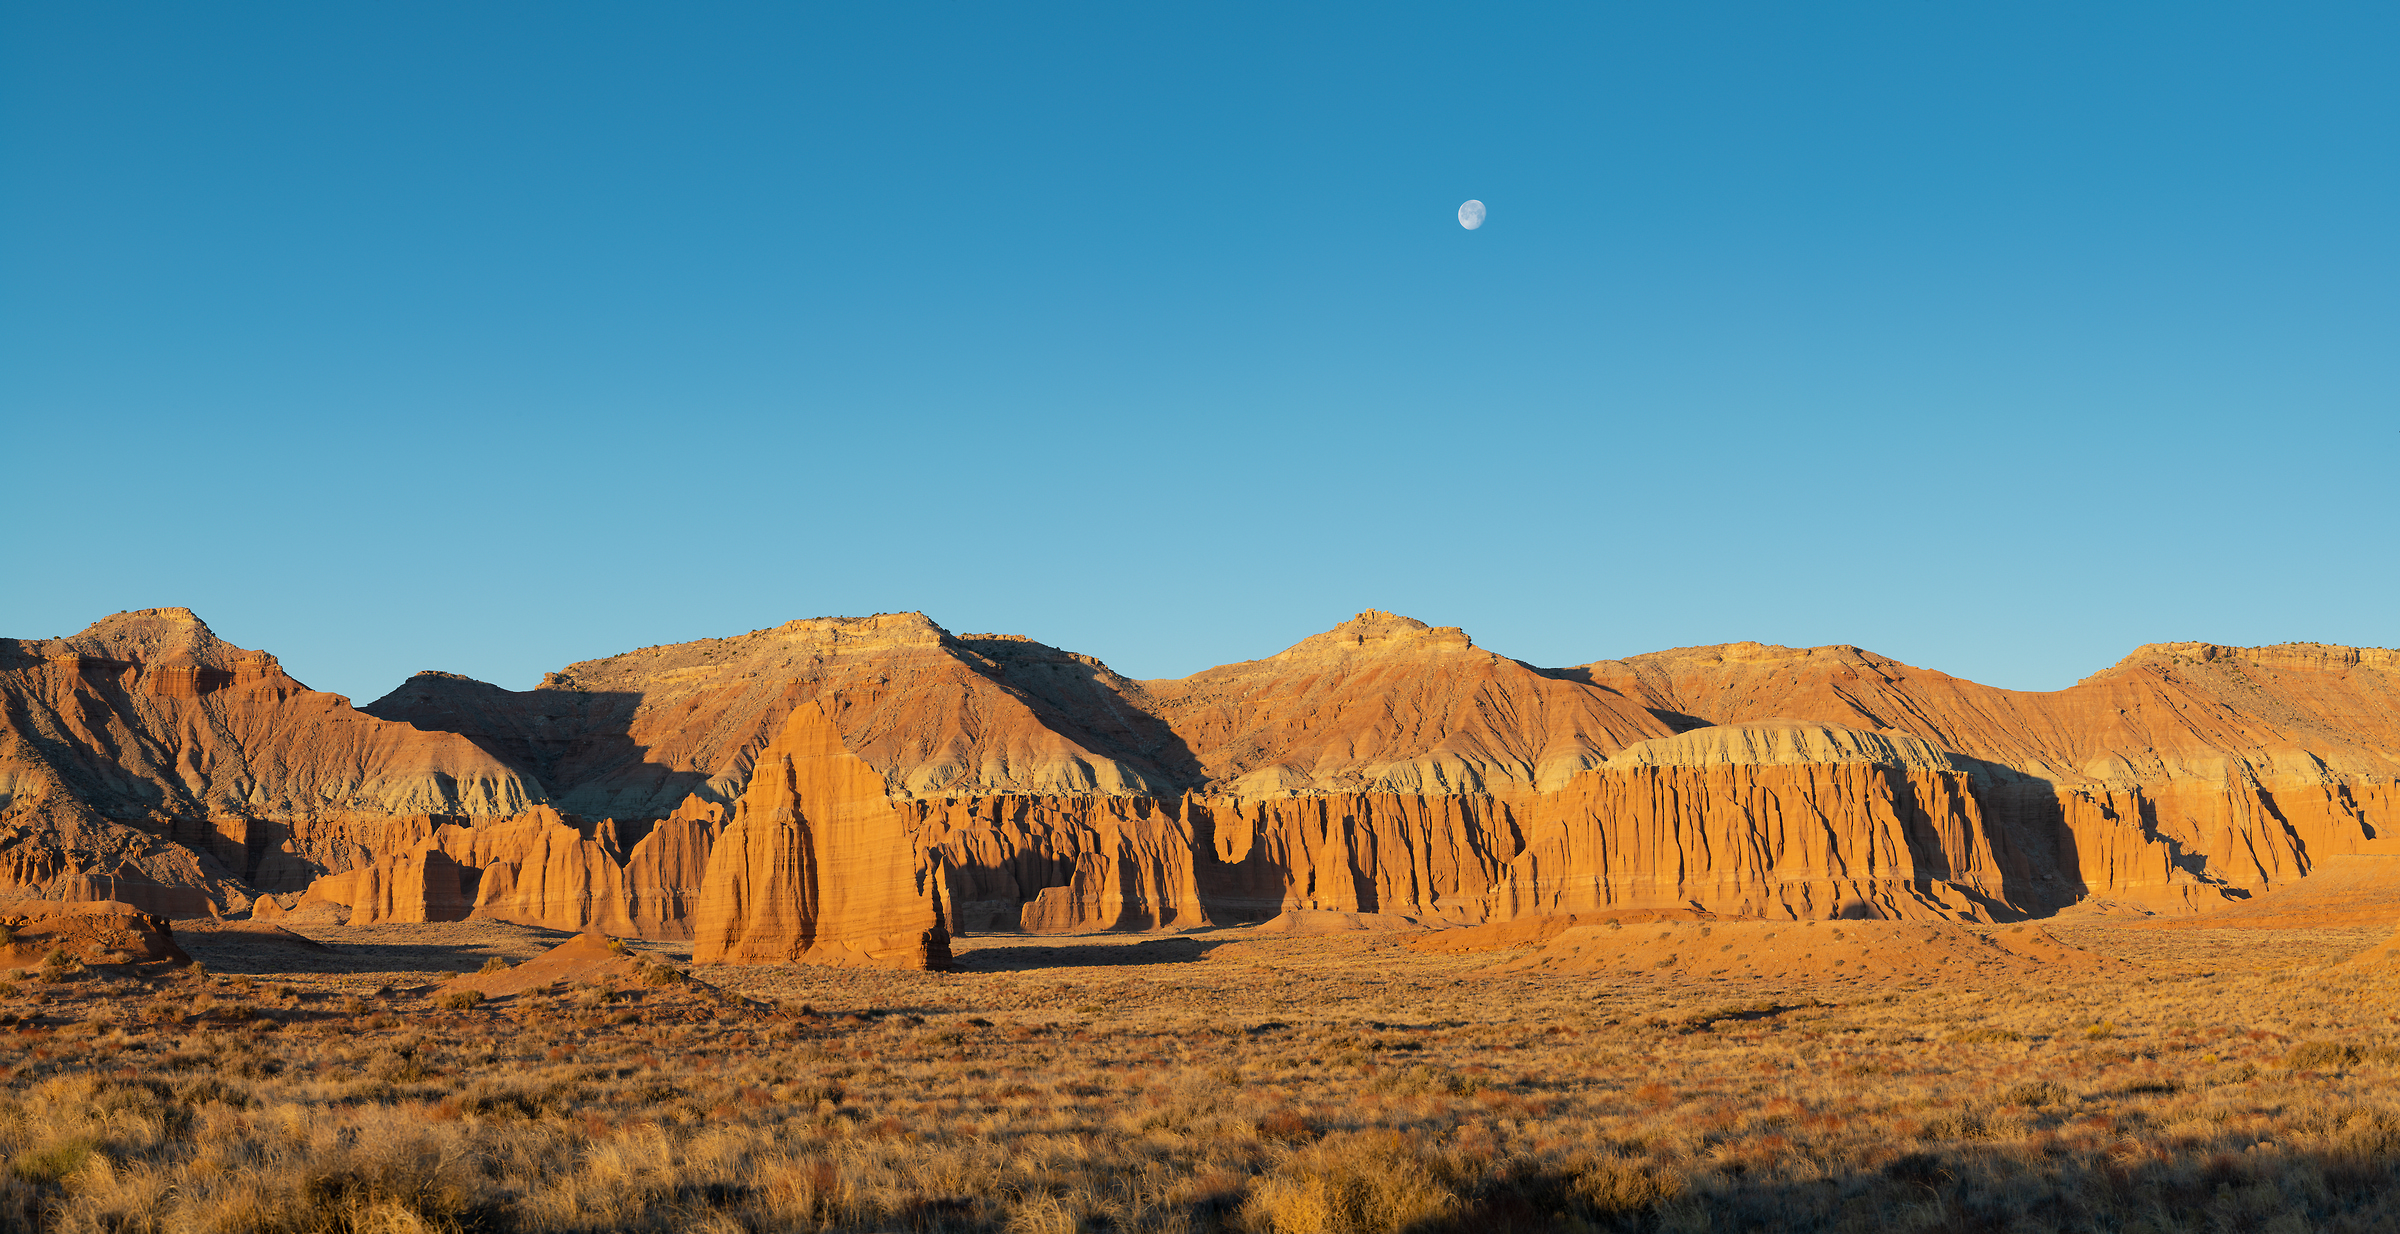 291 megapixels! A very high resolution, large-format VAST photo print of a Utah landscape with moon; big wallpaper photograph created by Greg Probst in Capitol Reef National Park, Utah.